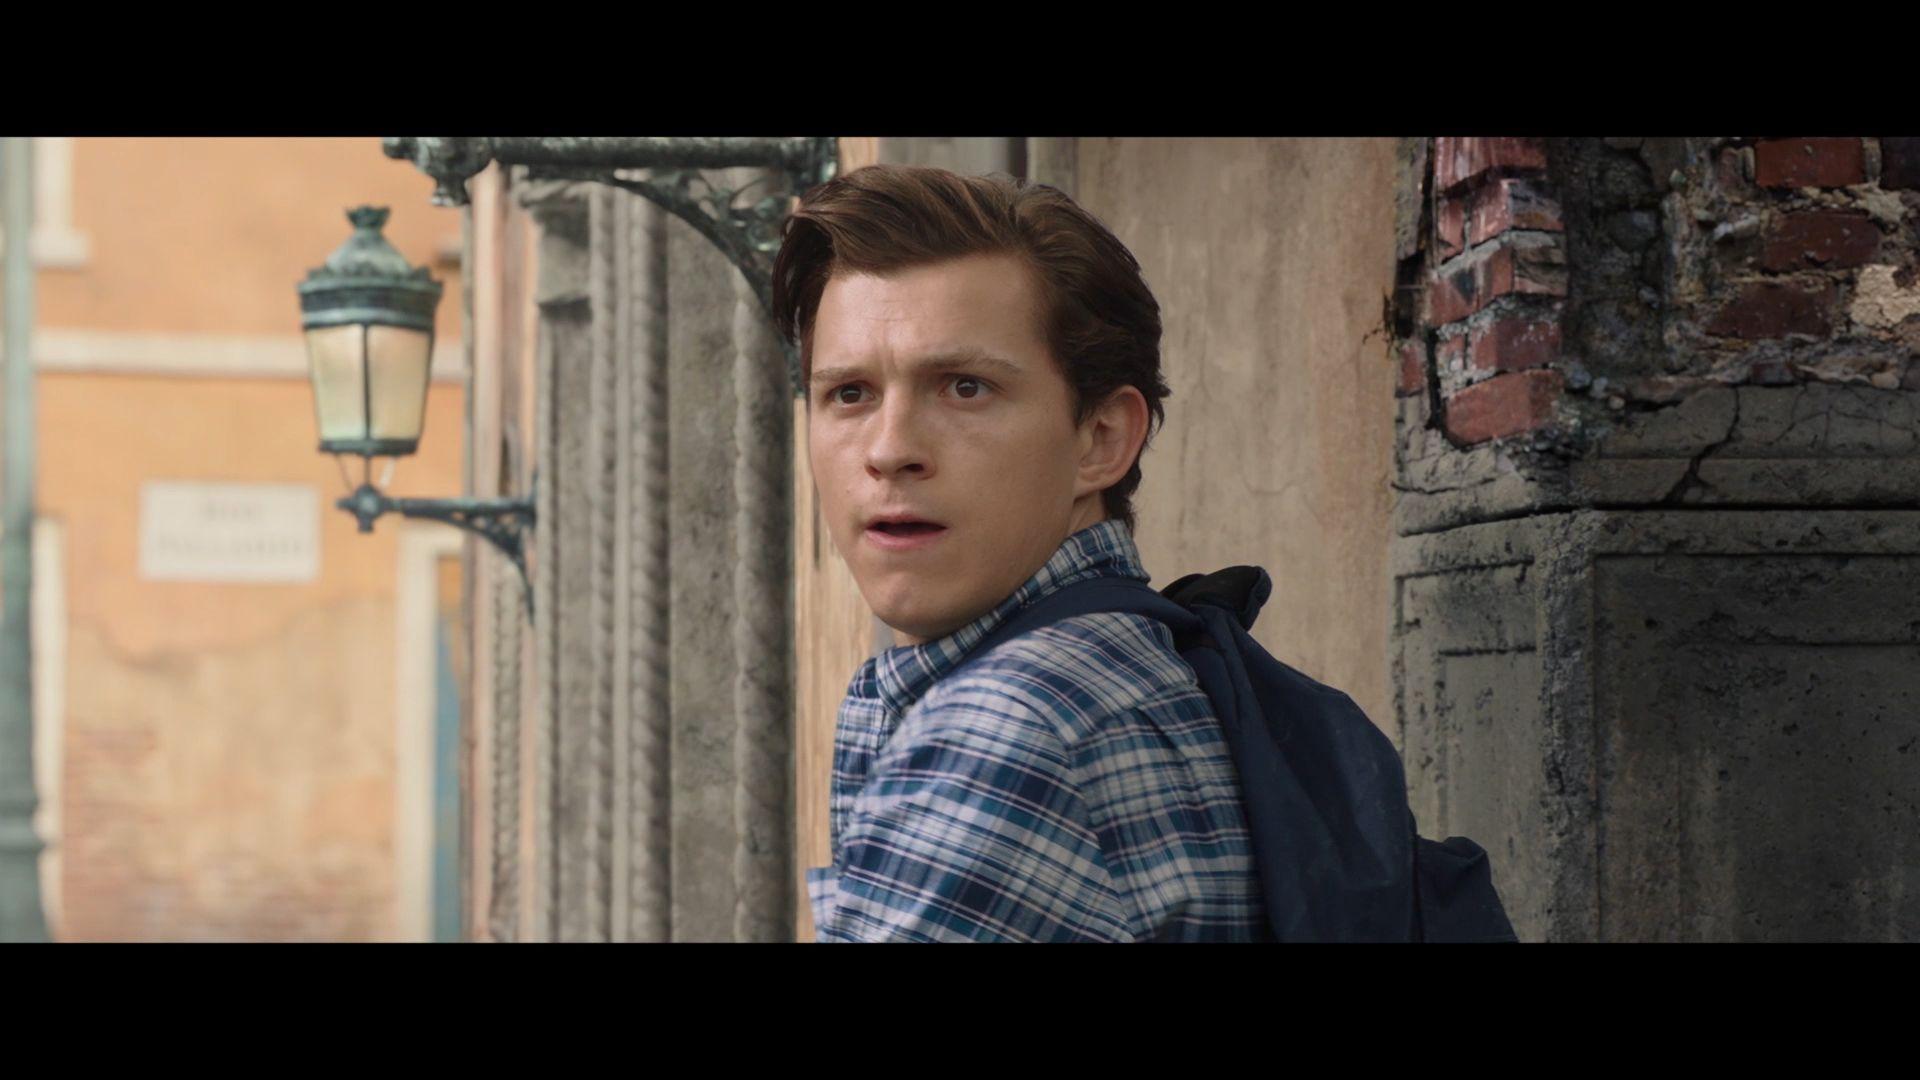 Spider Man's Tom Holland Shaves His Head For A Dramatic New Look